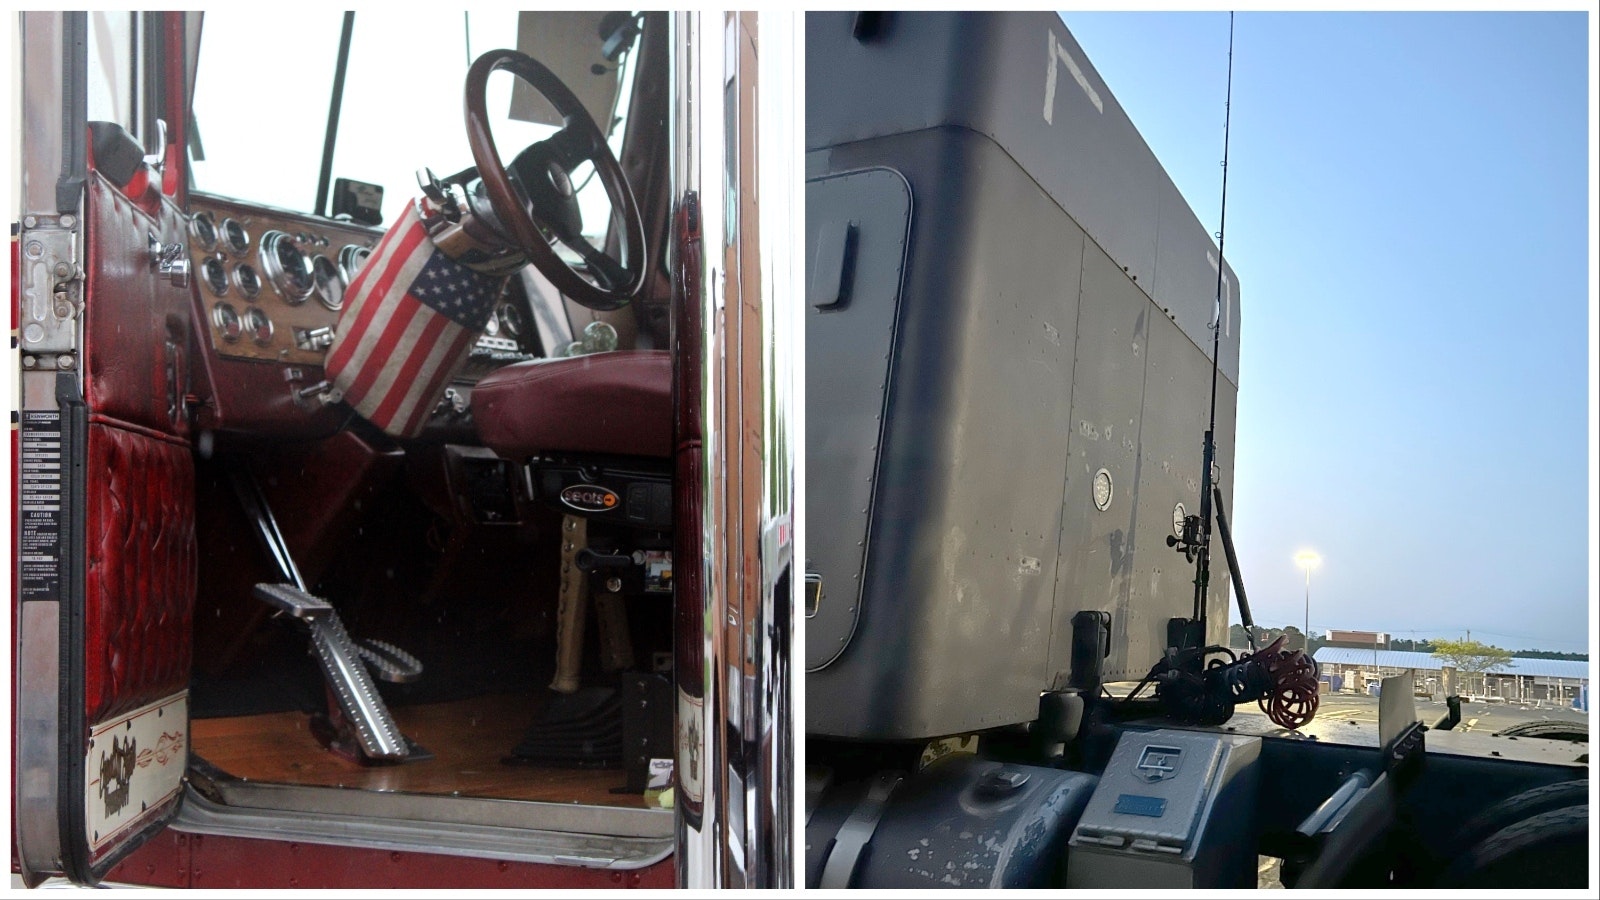 The cab of Clyde Green’s truck, left. At right, Kyle Holloway straps his fishing pole to the back of his cab.